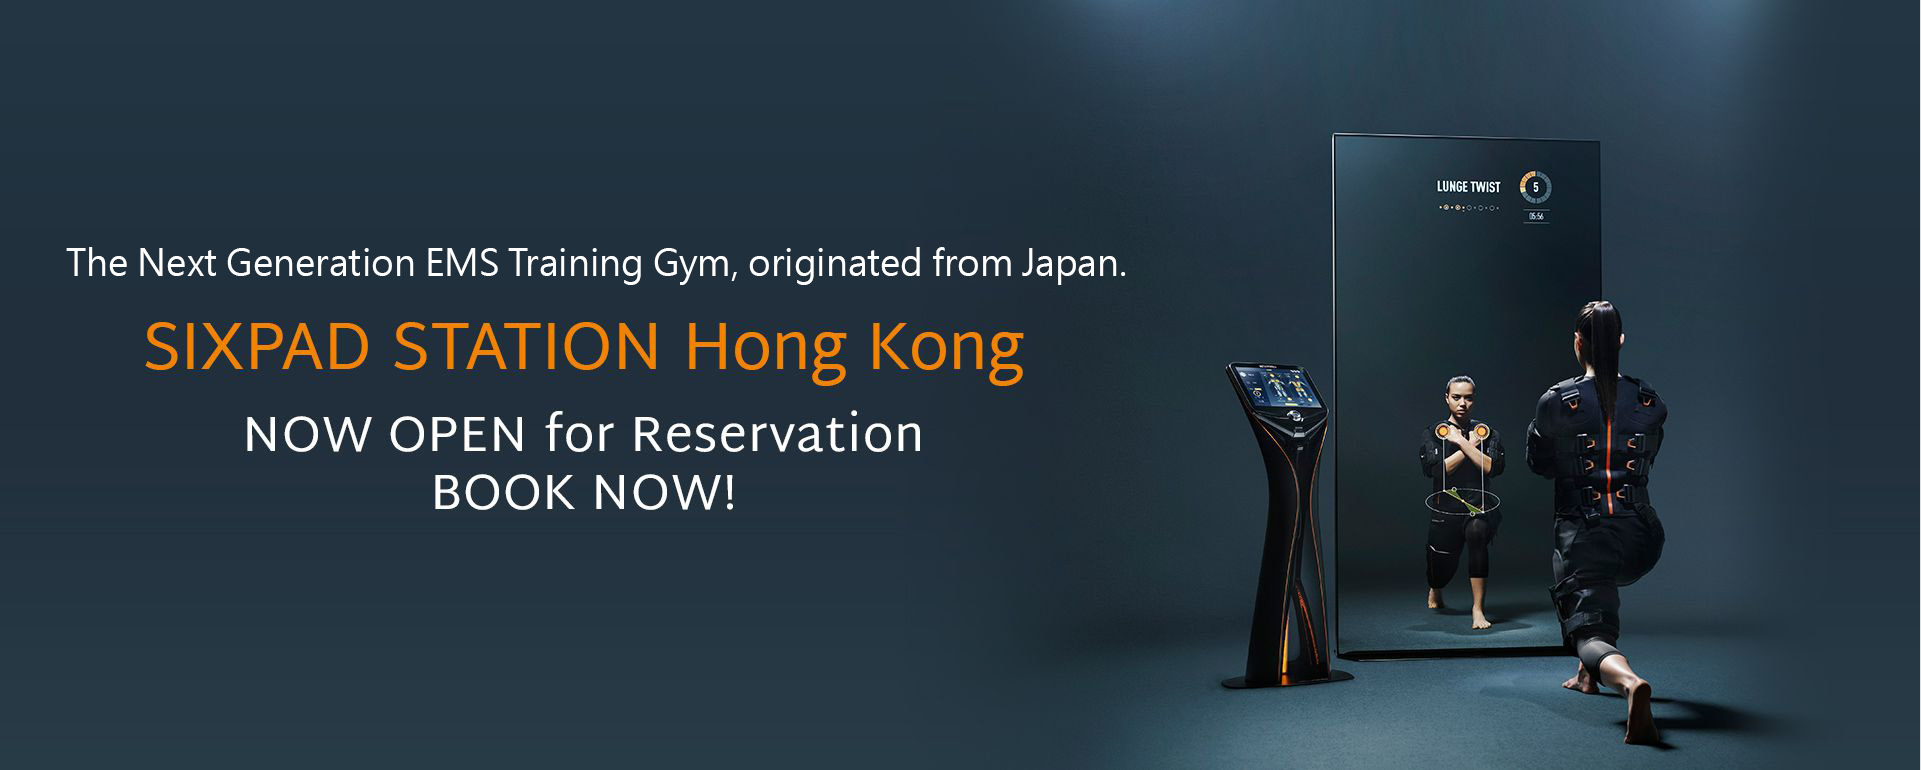 AUG 2019 OPEN SIXPAD STATION Hong Kong NOW OPEN for Reservation BOOK NOW!